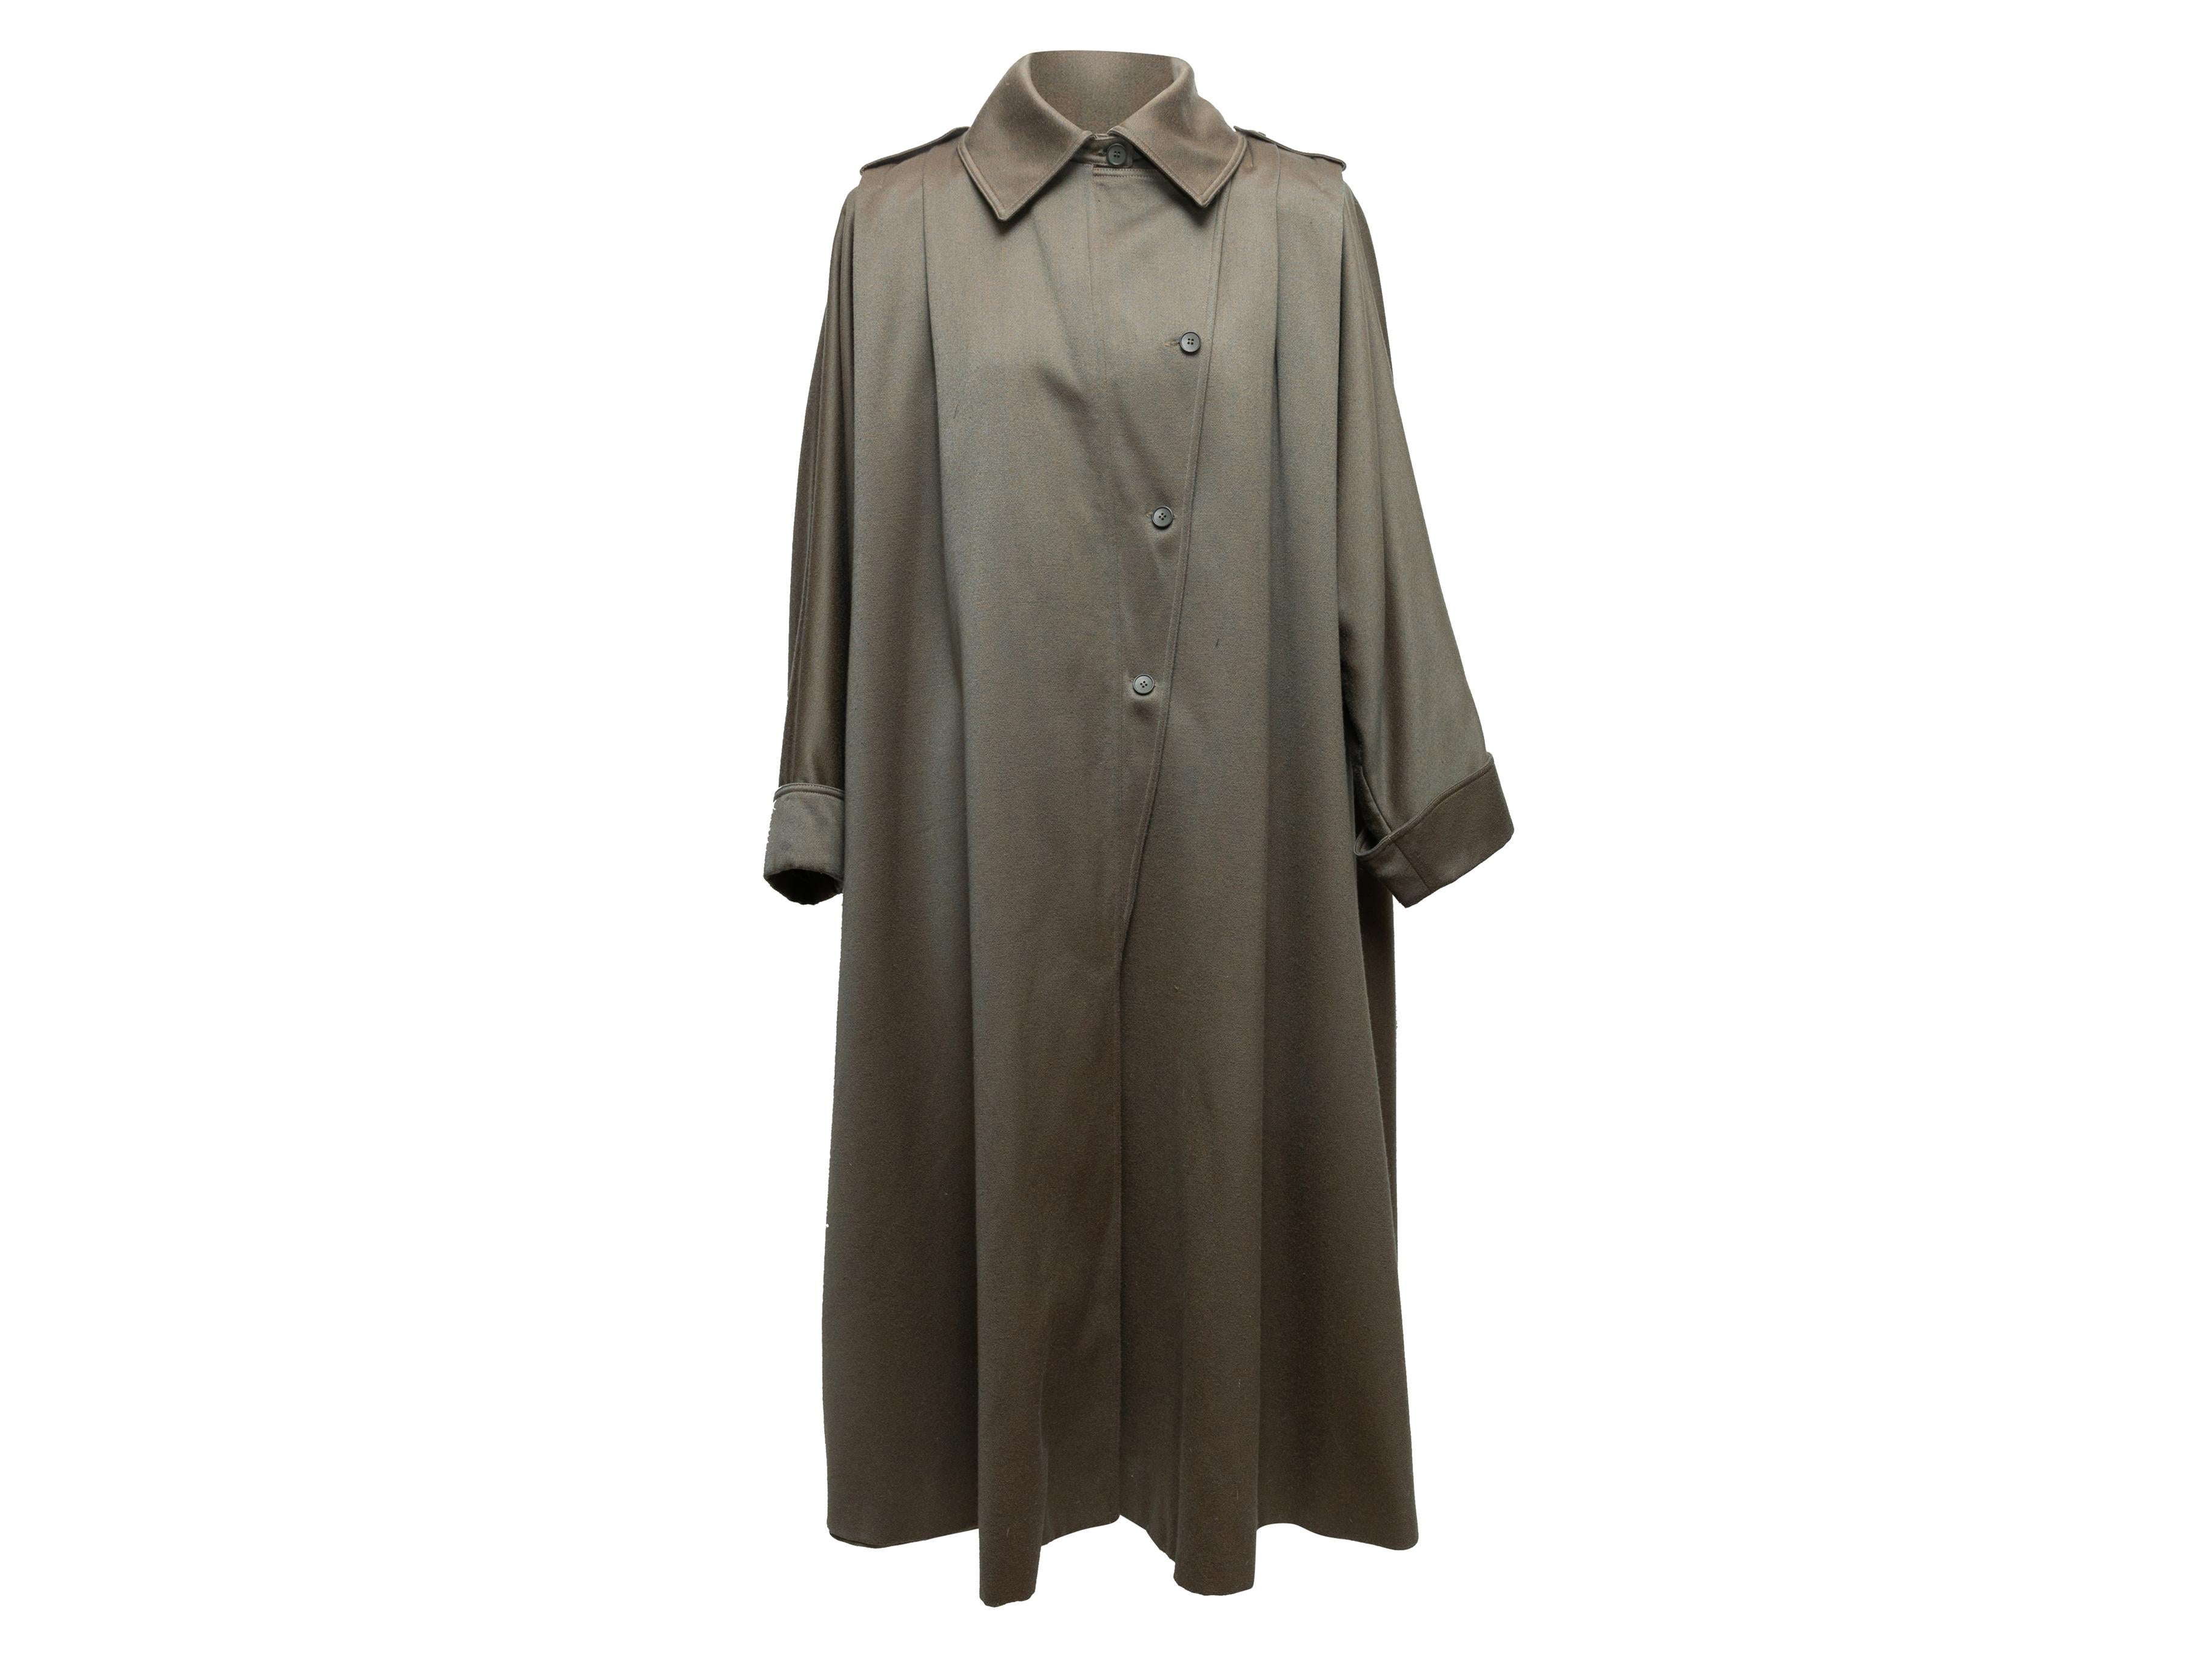 Vintage olive long wool swing coat by Hanae Mori. Circa 1970s. Pointed collar. Button closures at front. 66